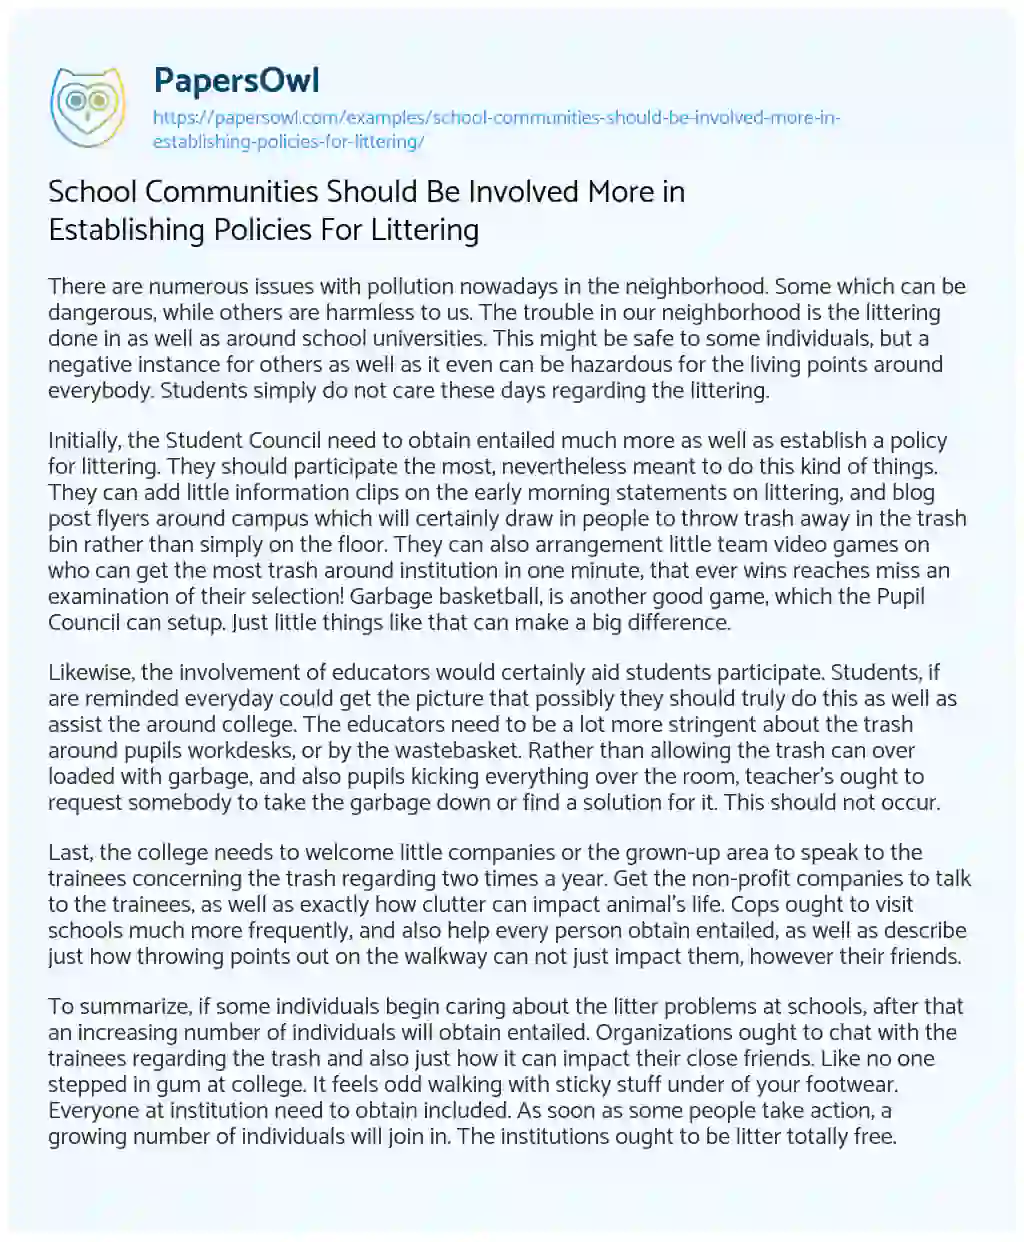 Essay on School Communities should be Involved more in Establishing Policies for Littering